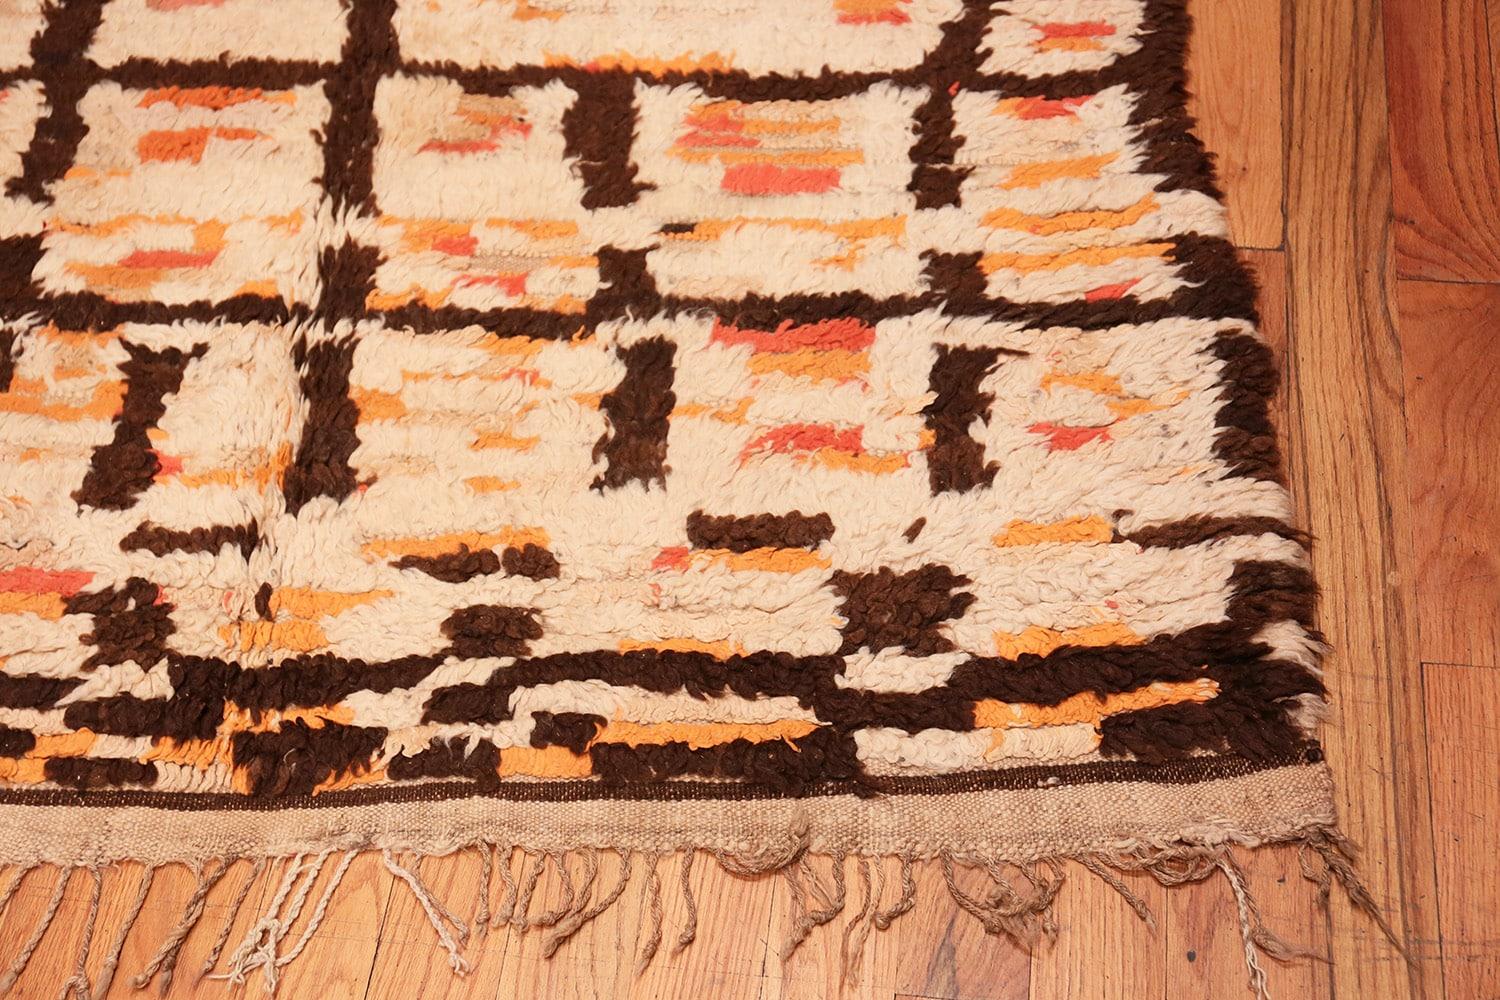 Tribal Vintage Moroccan Rug. Size: 4 ft 8 in x 9 ft 2 in (1.42 m x 2.79 m)